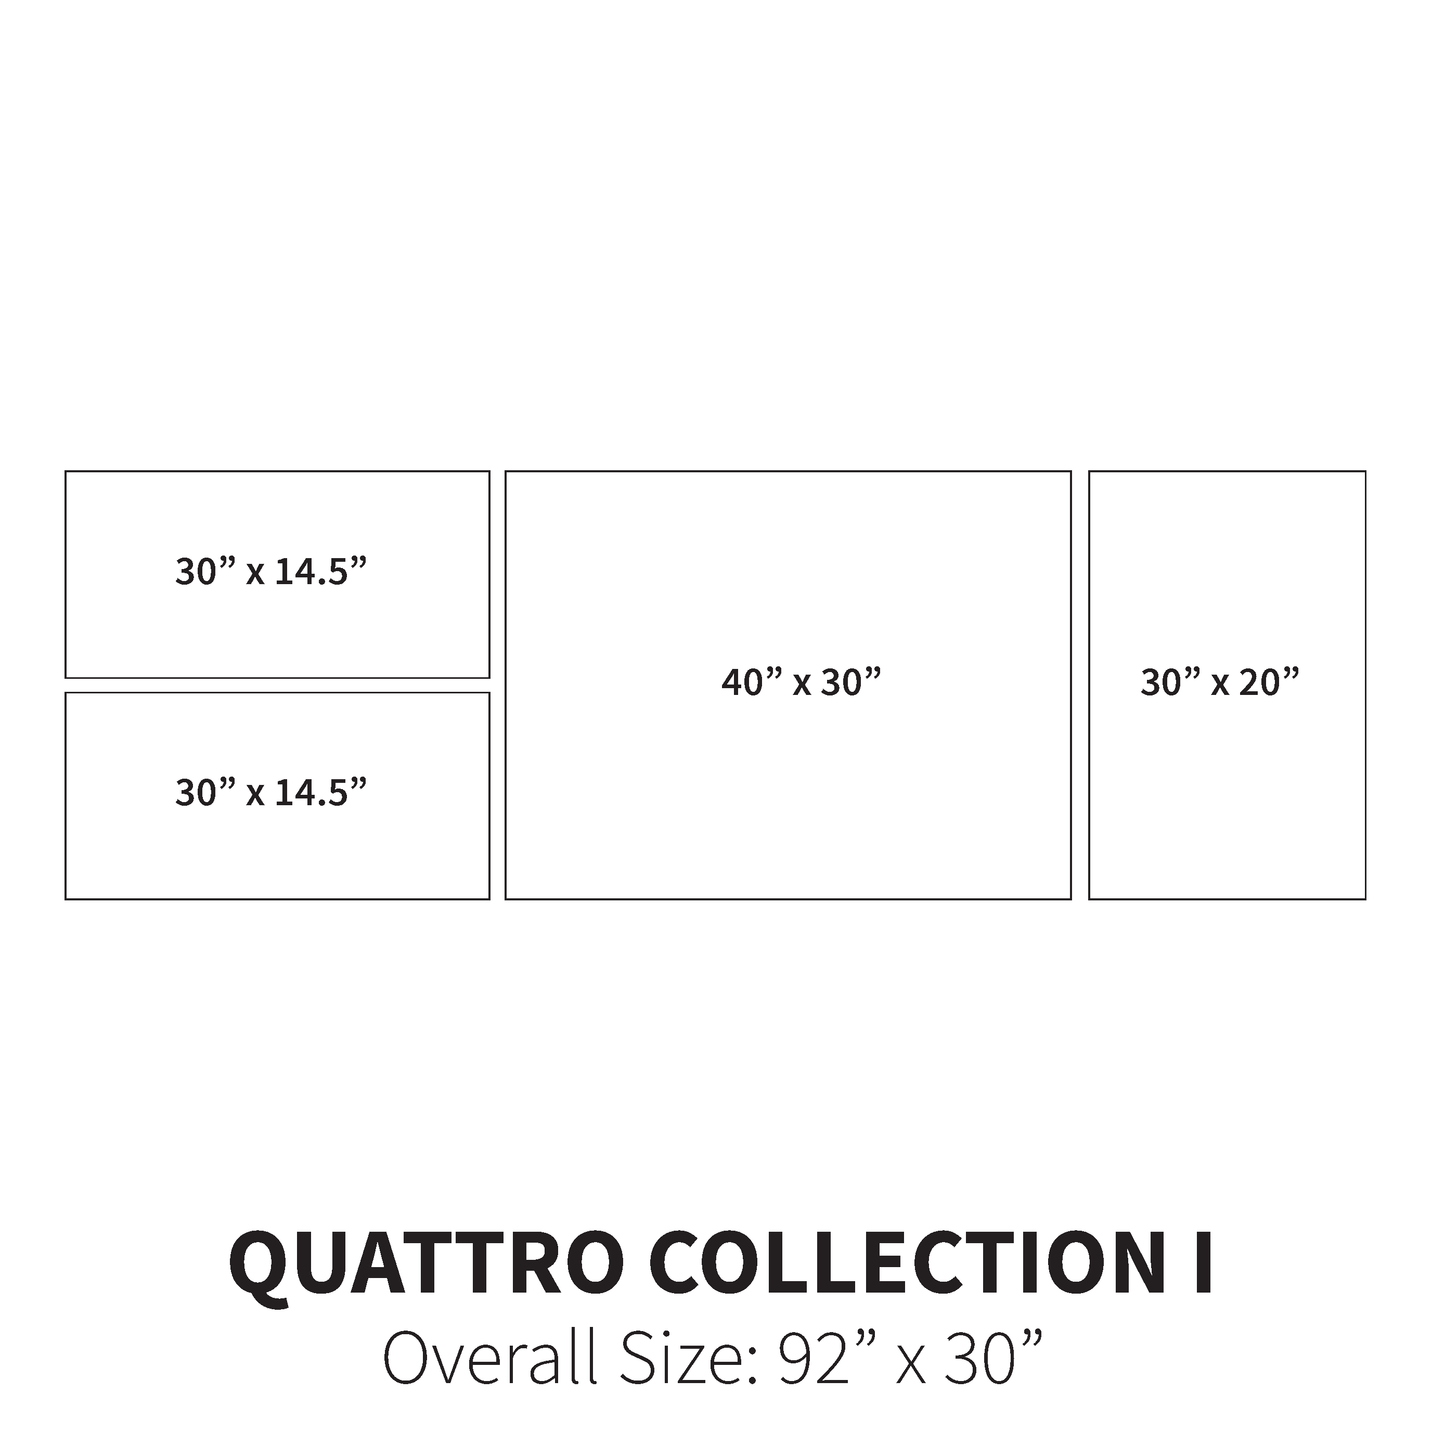 Quattro Collection I (Overall Size: 92" x 30")